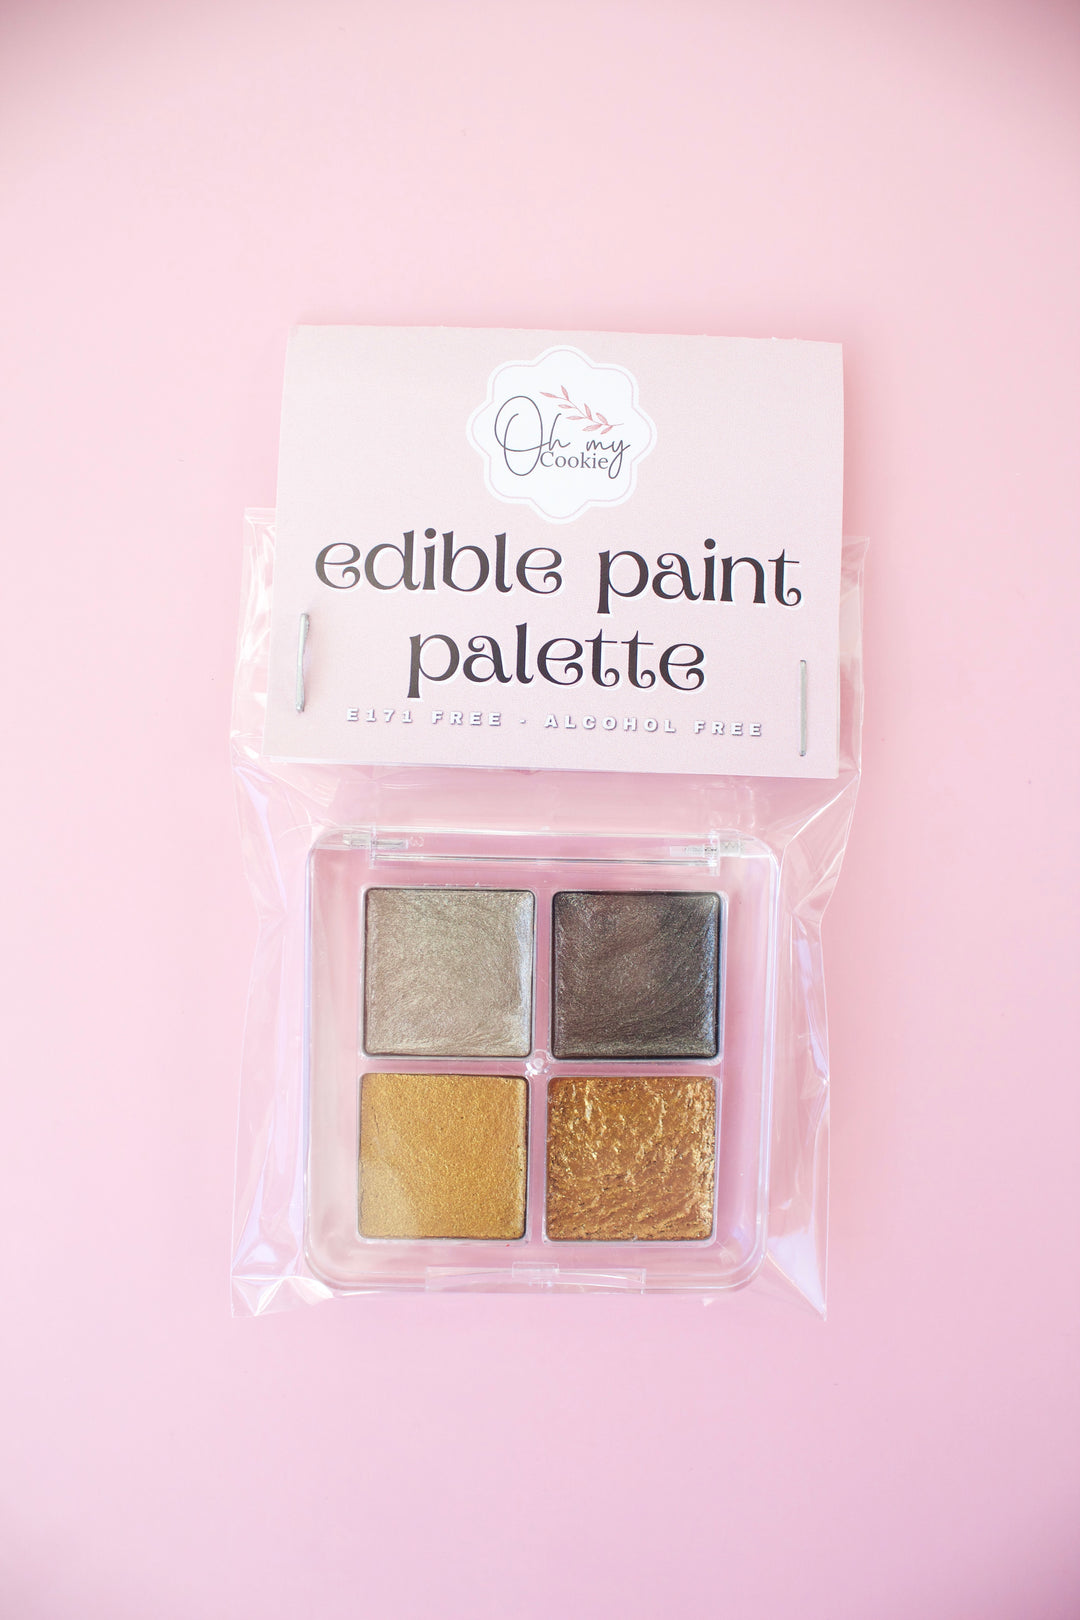 Edible paint palette - Gold & Silver - Water activated